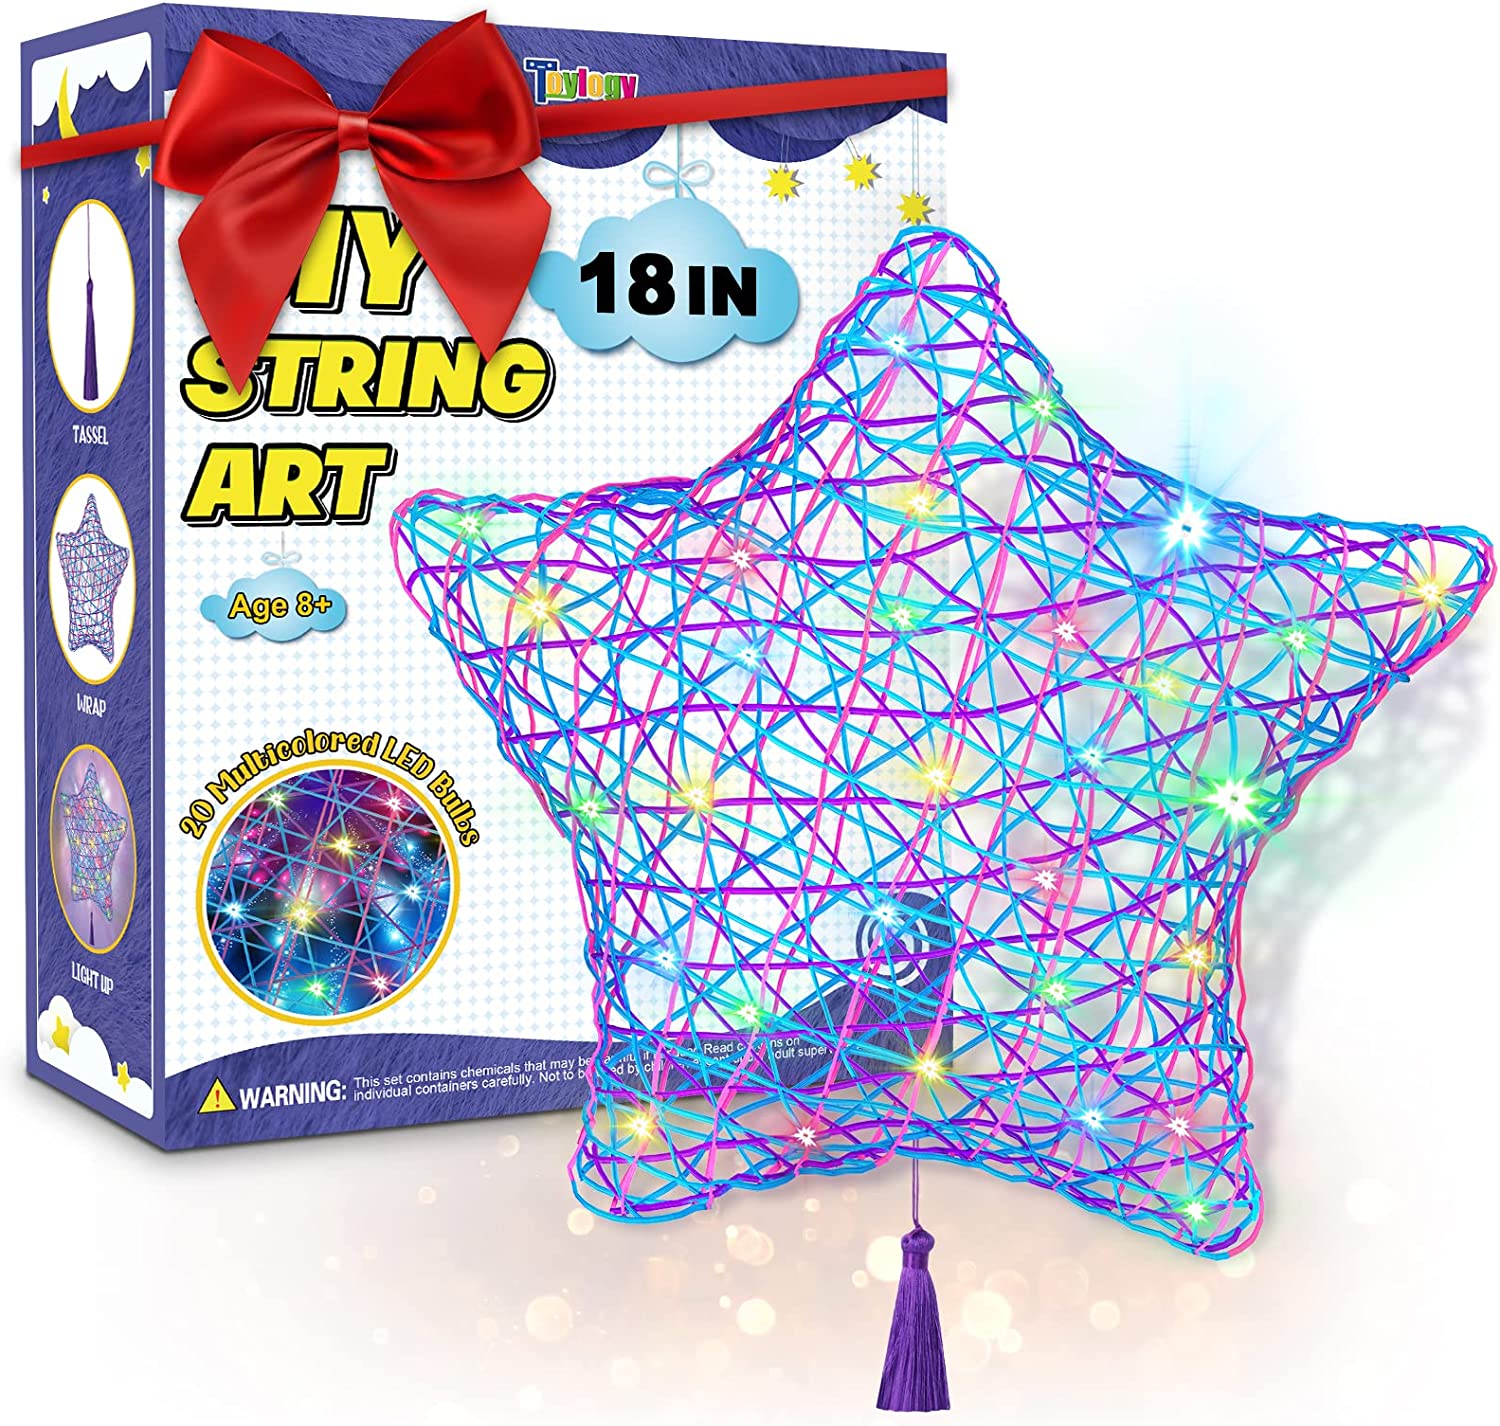 Loiion loiion 3d string art kit for kids-arts and crafts for girls ages  8-12,makes light-up lanterns with light, toys for girls,birt